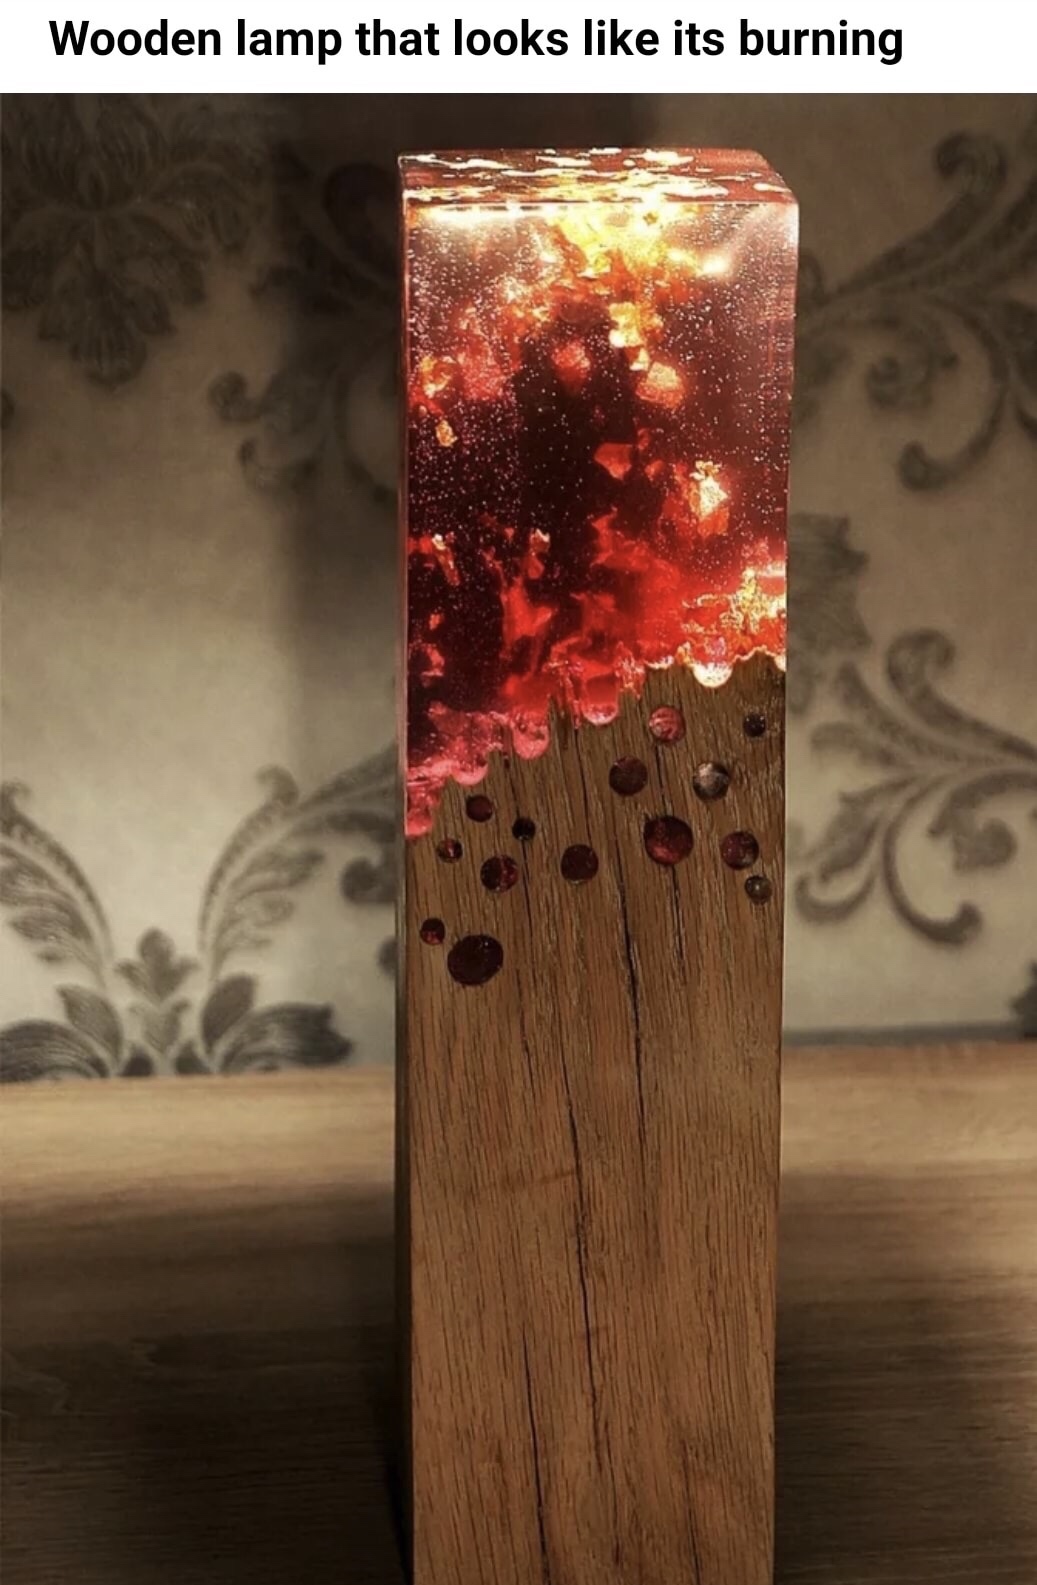 minecraft torch real life - Wooden lamp that looks its burning